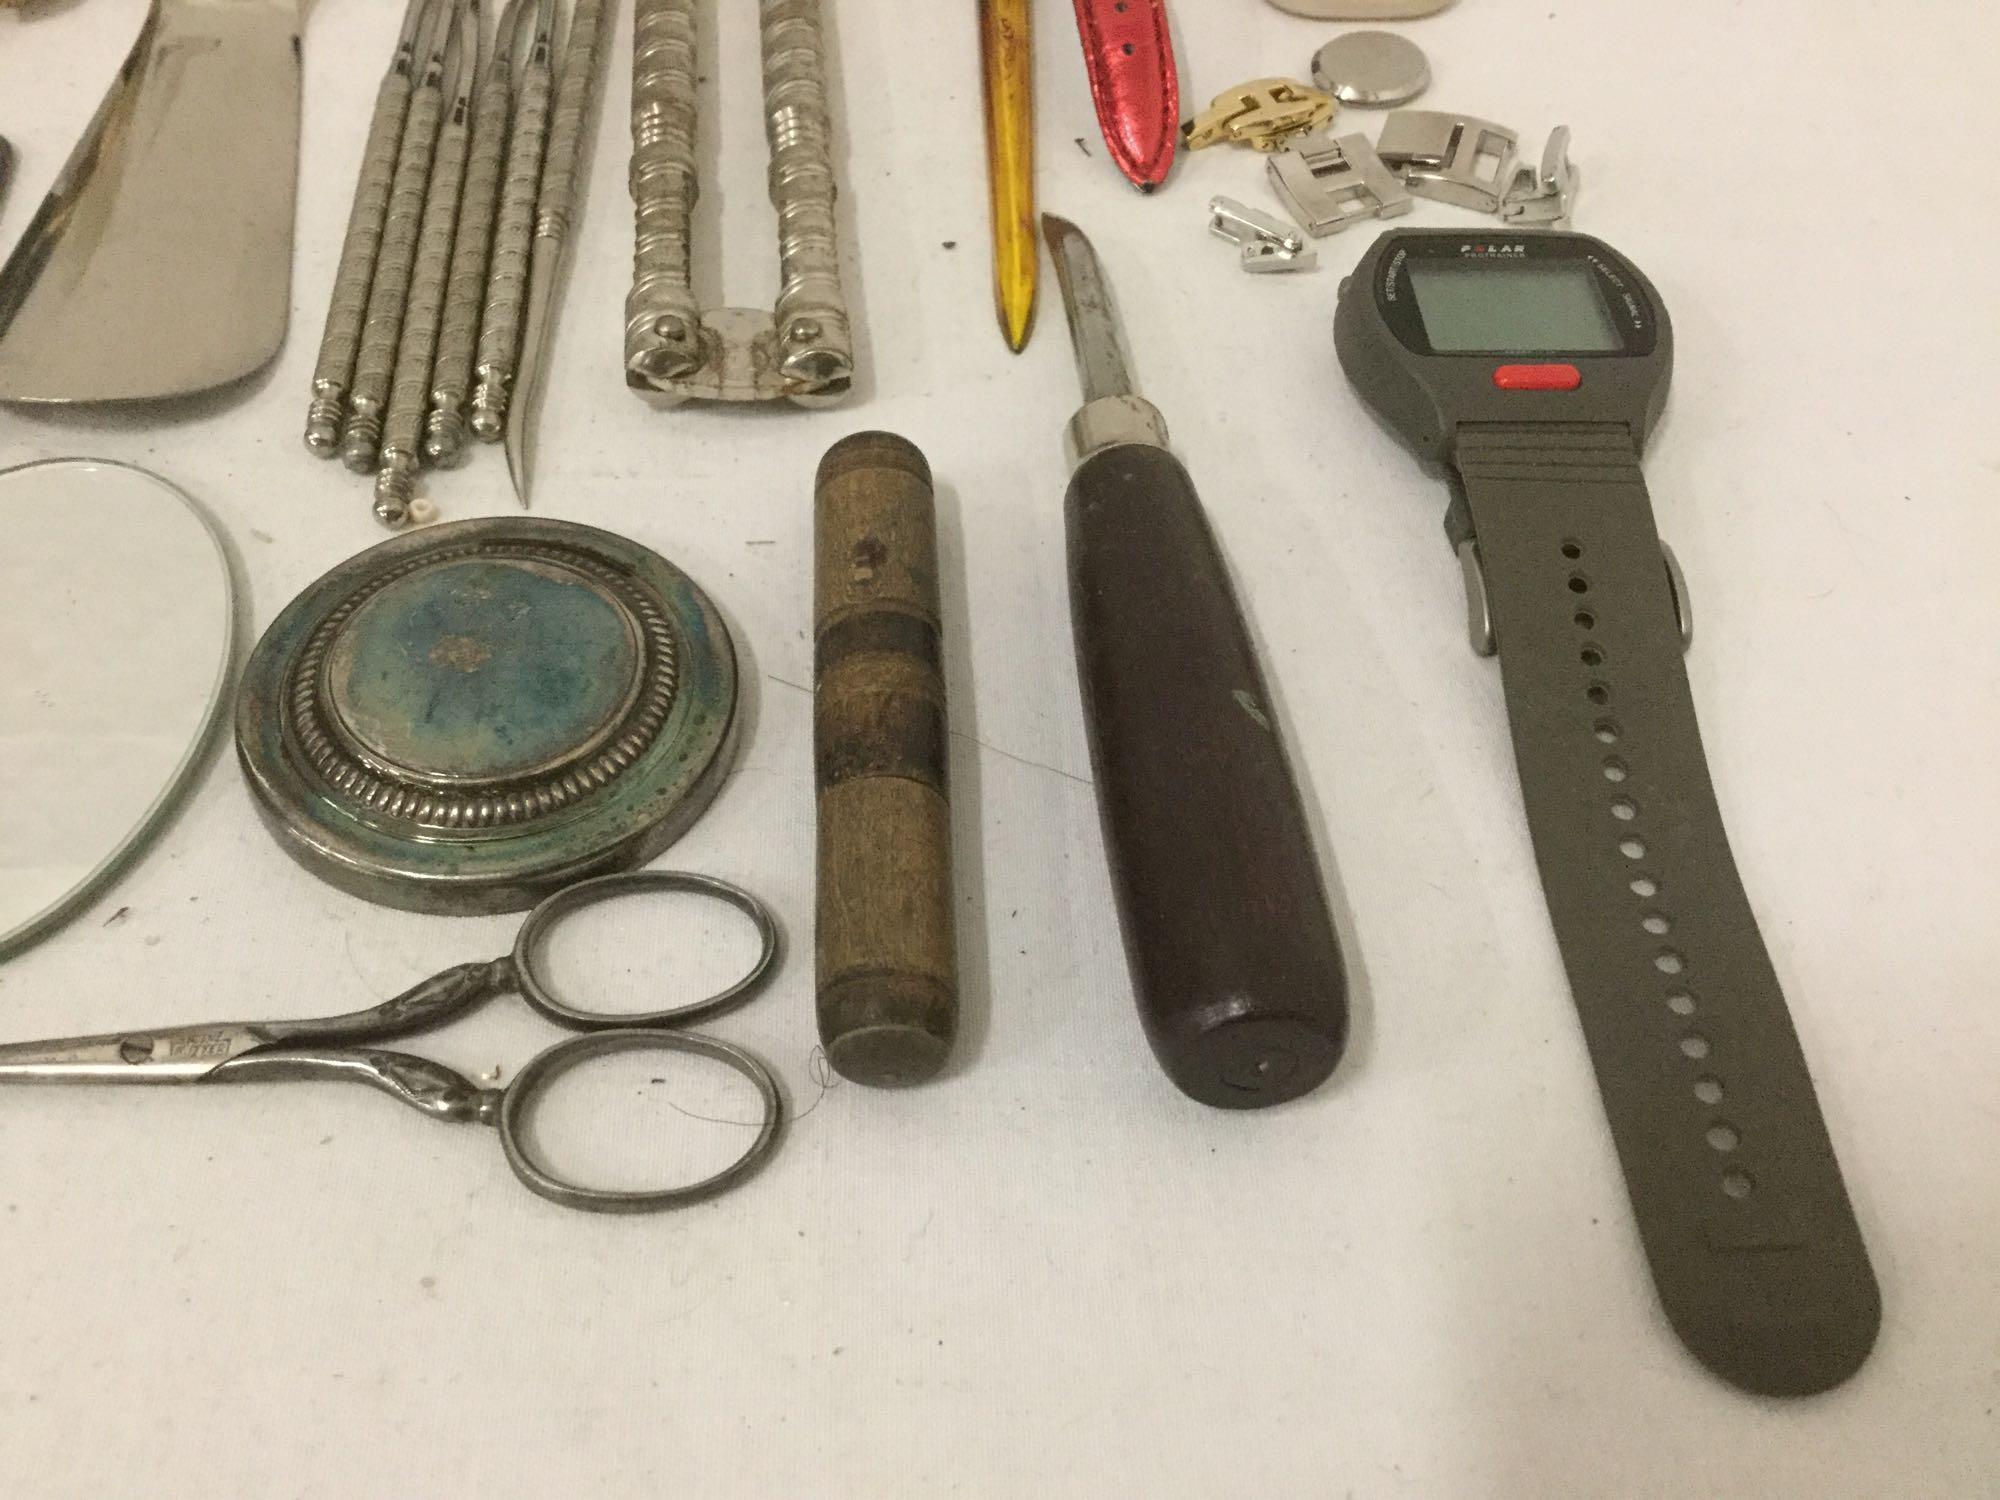 Large bag of mixed items: pocket knife, belt buckles, watches, sun dial & more